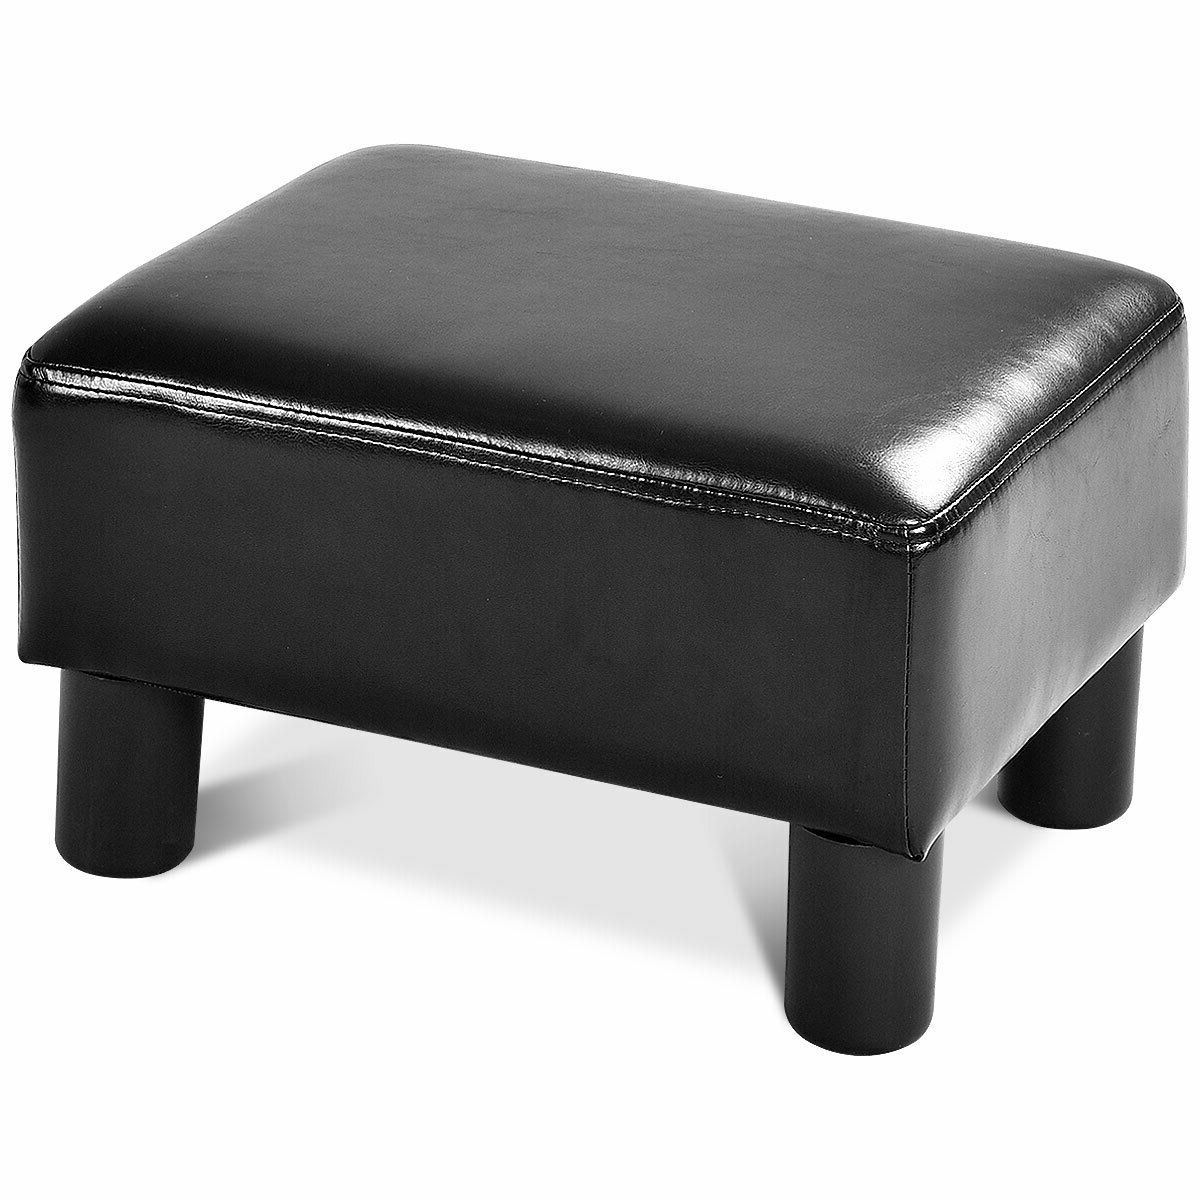 Preferred Black Leather And Gray Canvas Pouf Ottomans In Small Ottoman Footrest Pu Leather Footstool Rectangular Seat Stool (View 4 of 10)